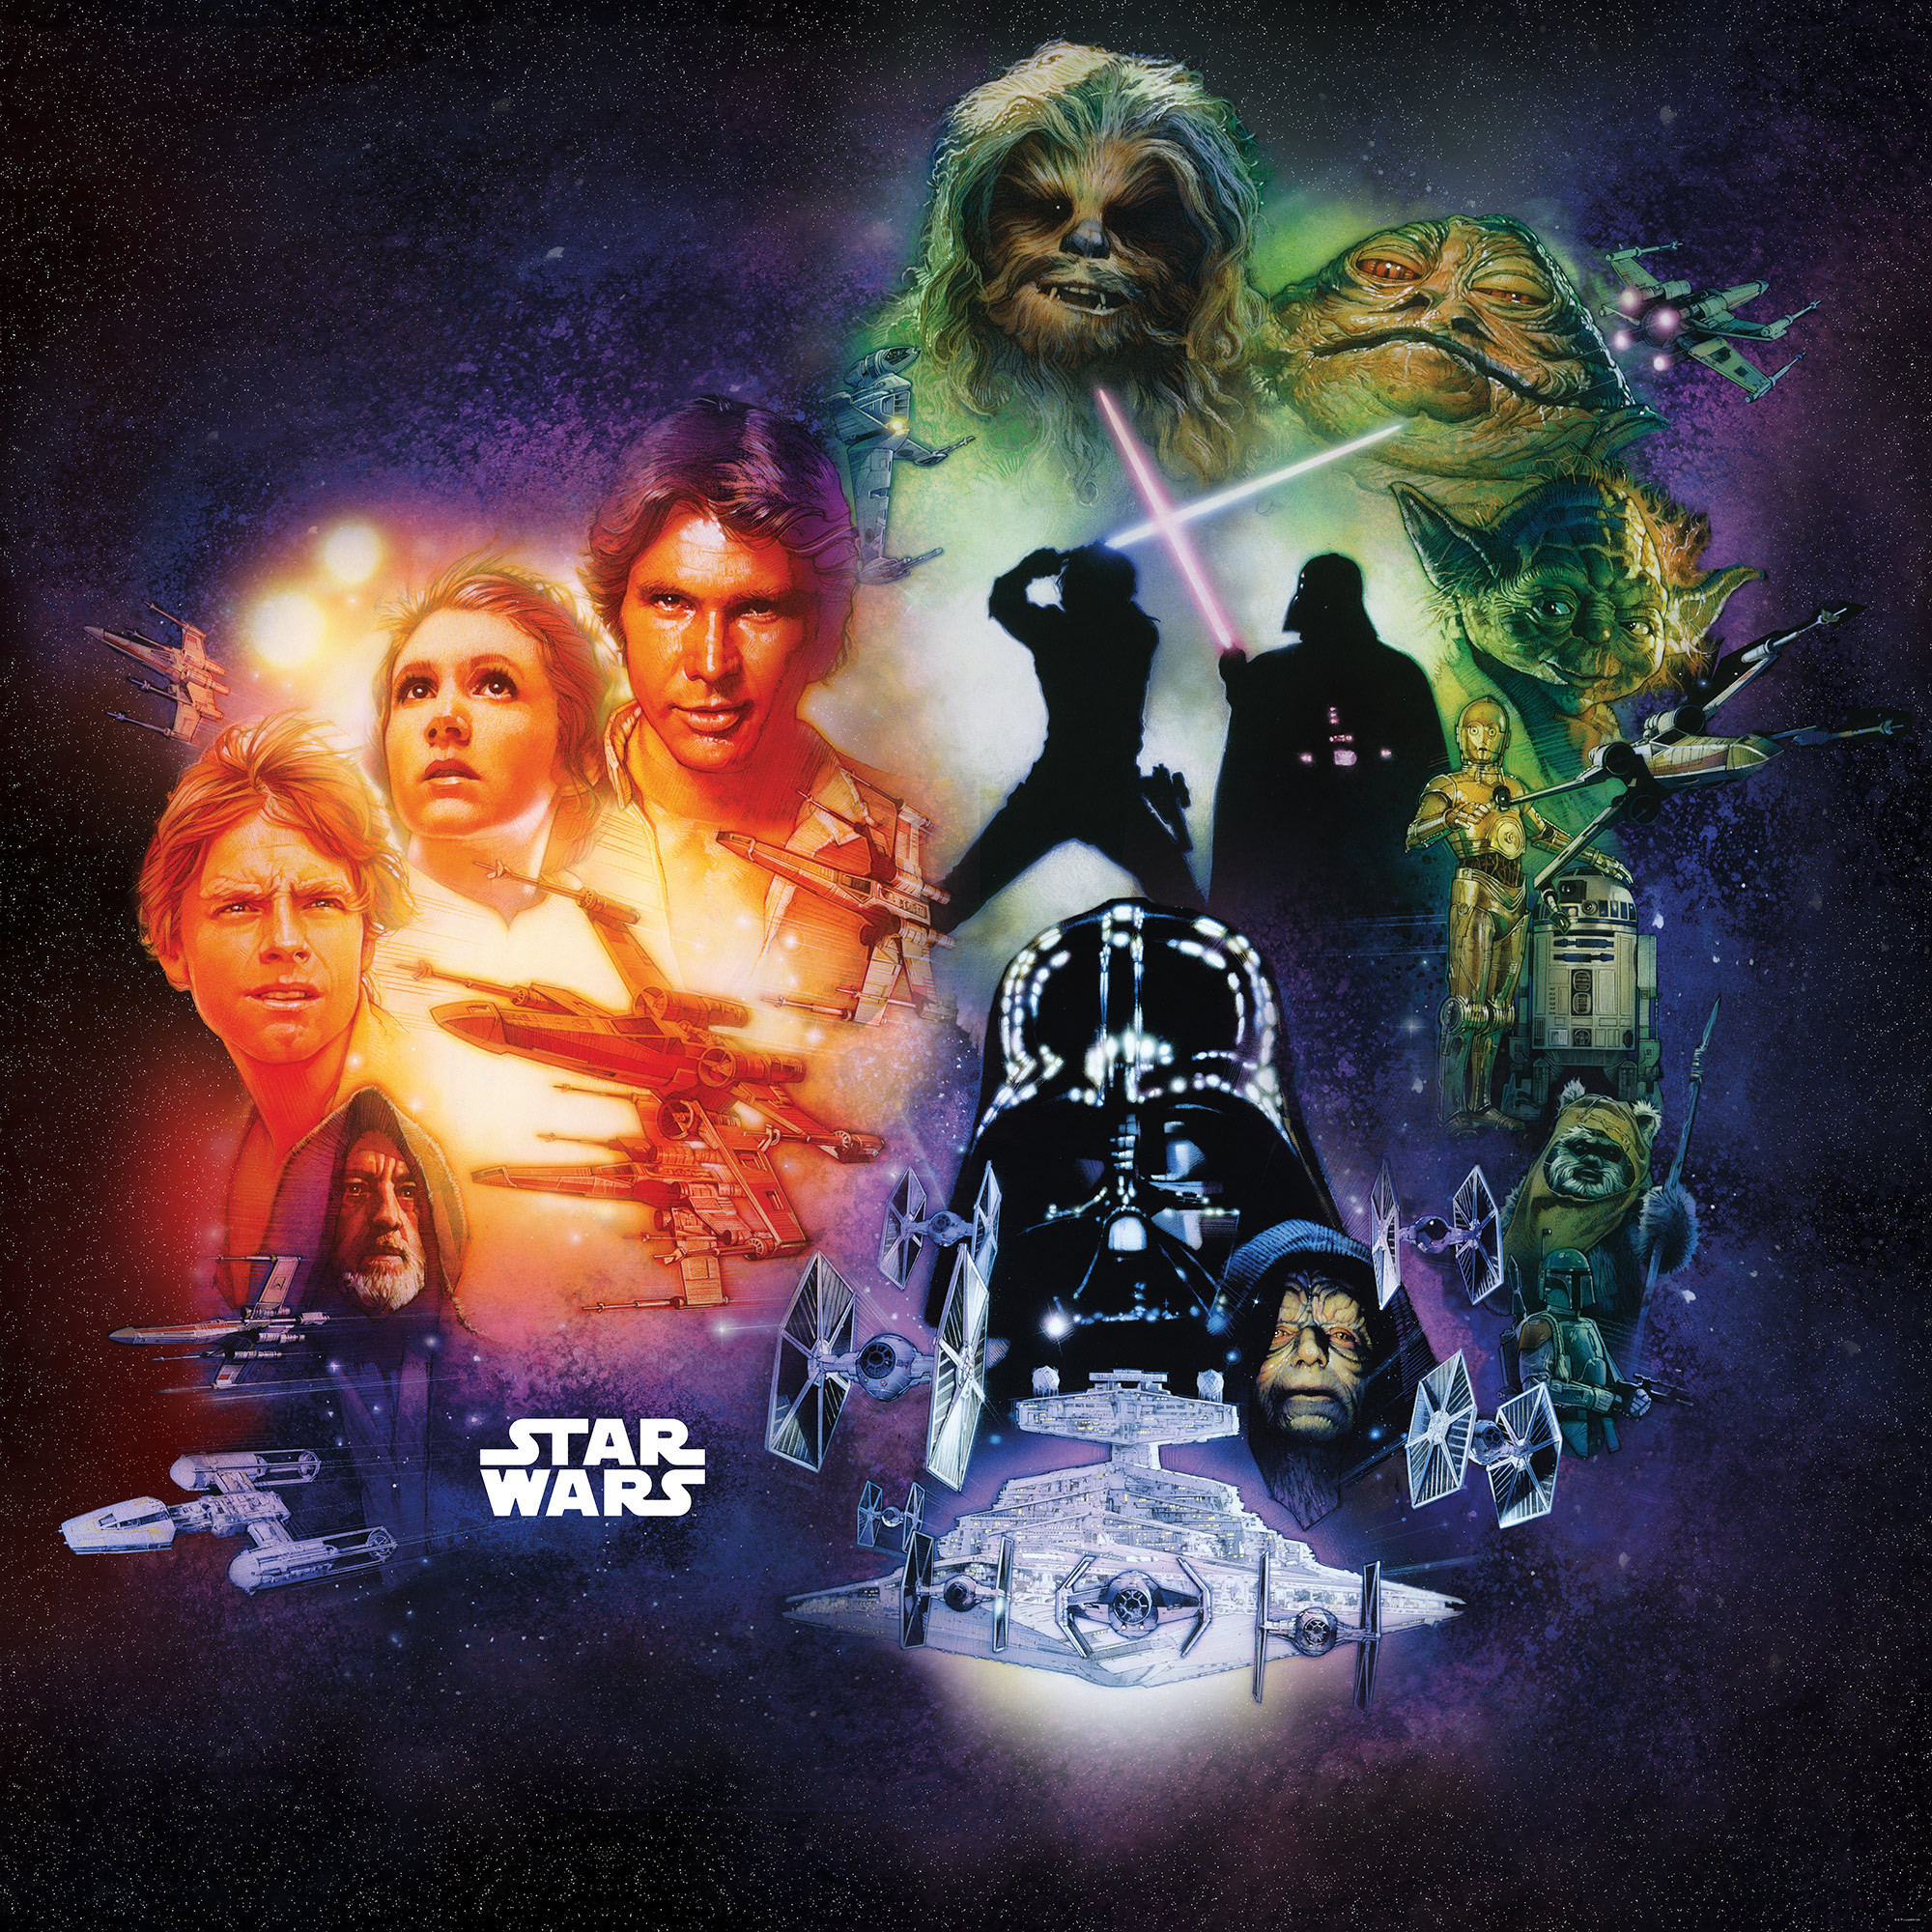 Photomurals  Digital print photomural Star Wars Classic Poster Collage  by Komar